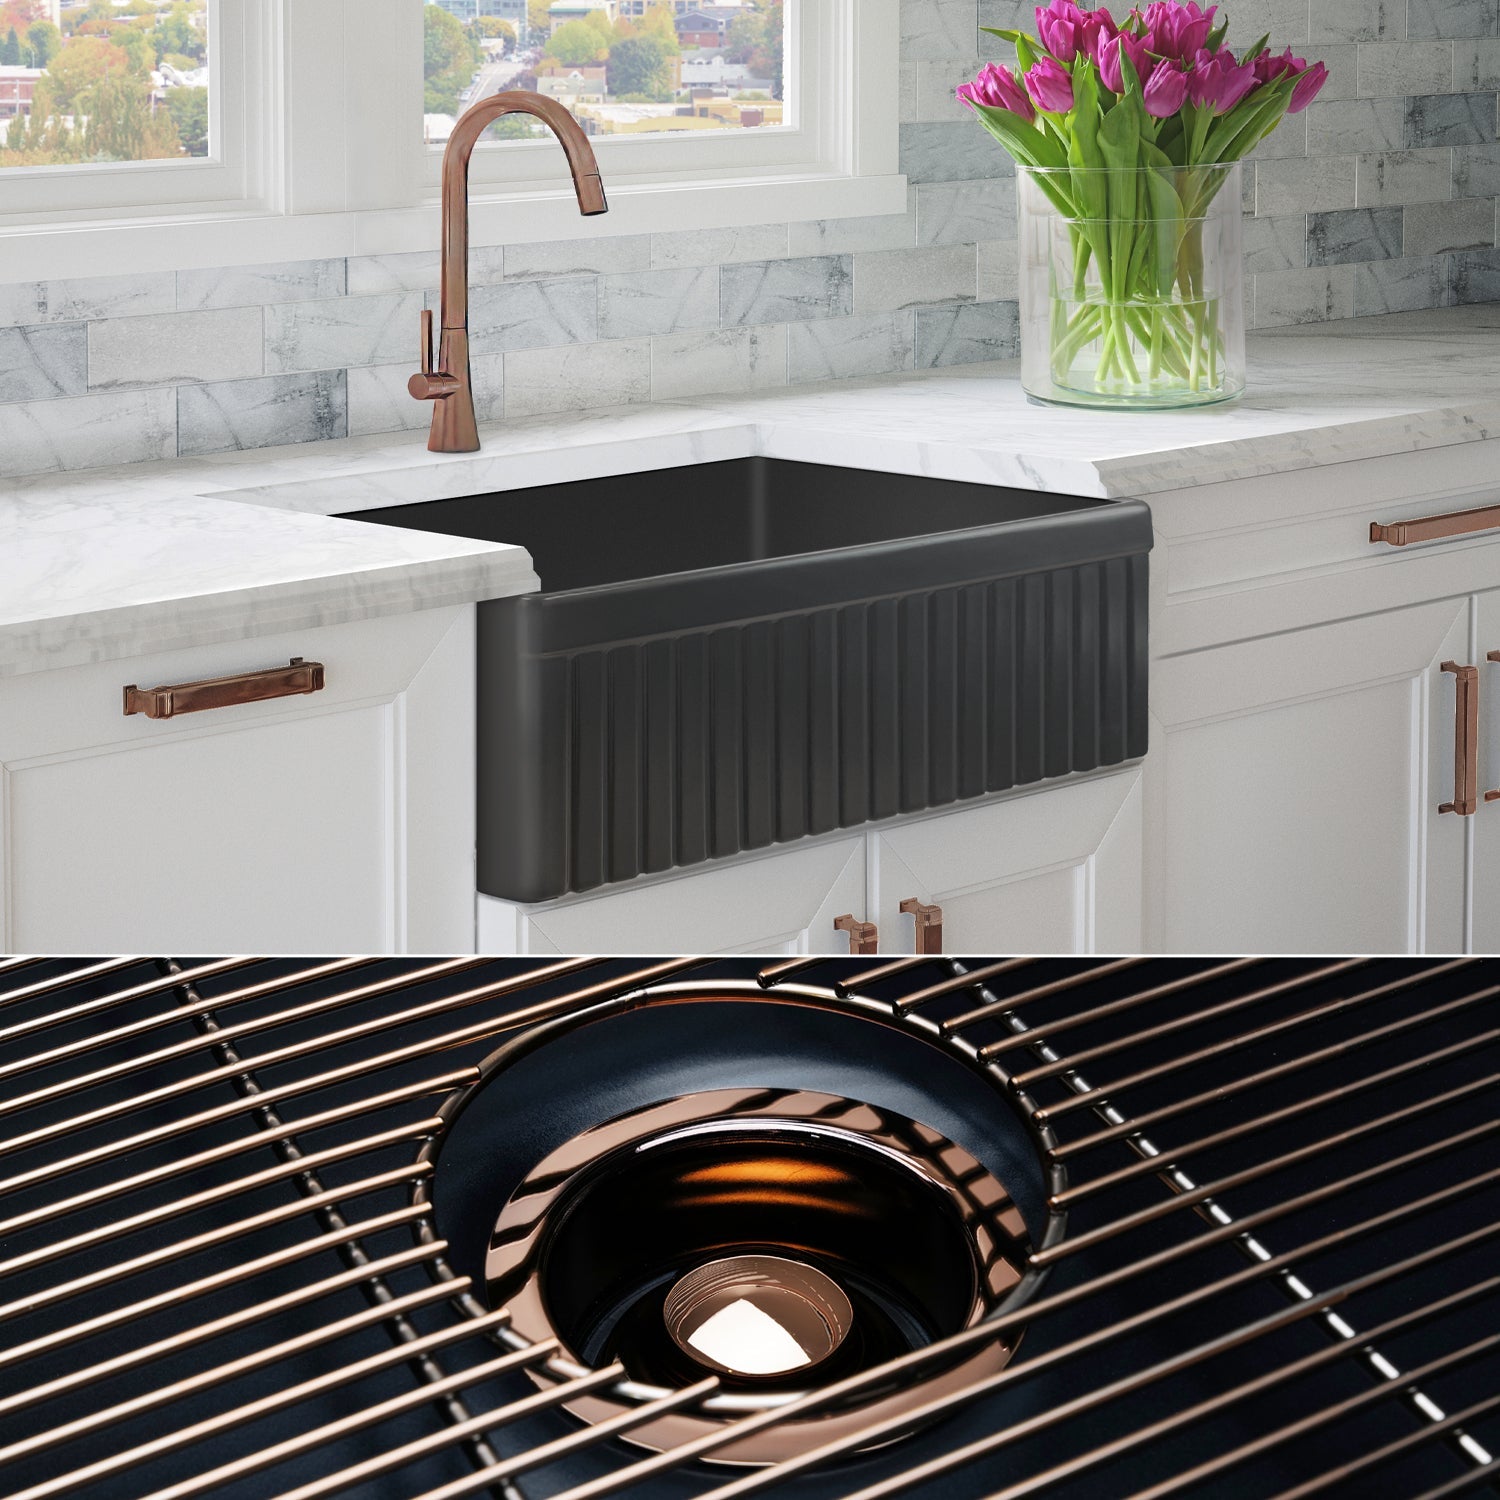 FSW1027RG LUX 33-INCH SOLID FIRECLAY FARMHOUSE SINK, MATTE BLACK, POL. ROSE GOLD ACCS, FLUTED FRONT